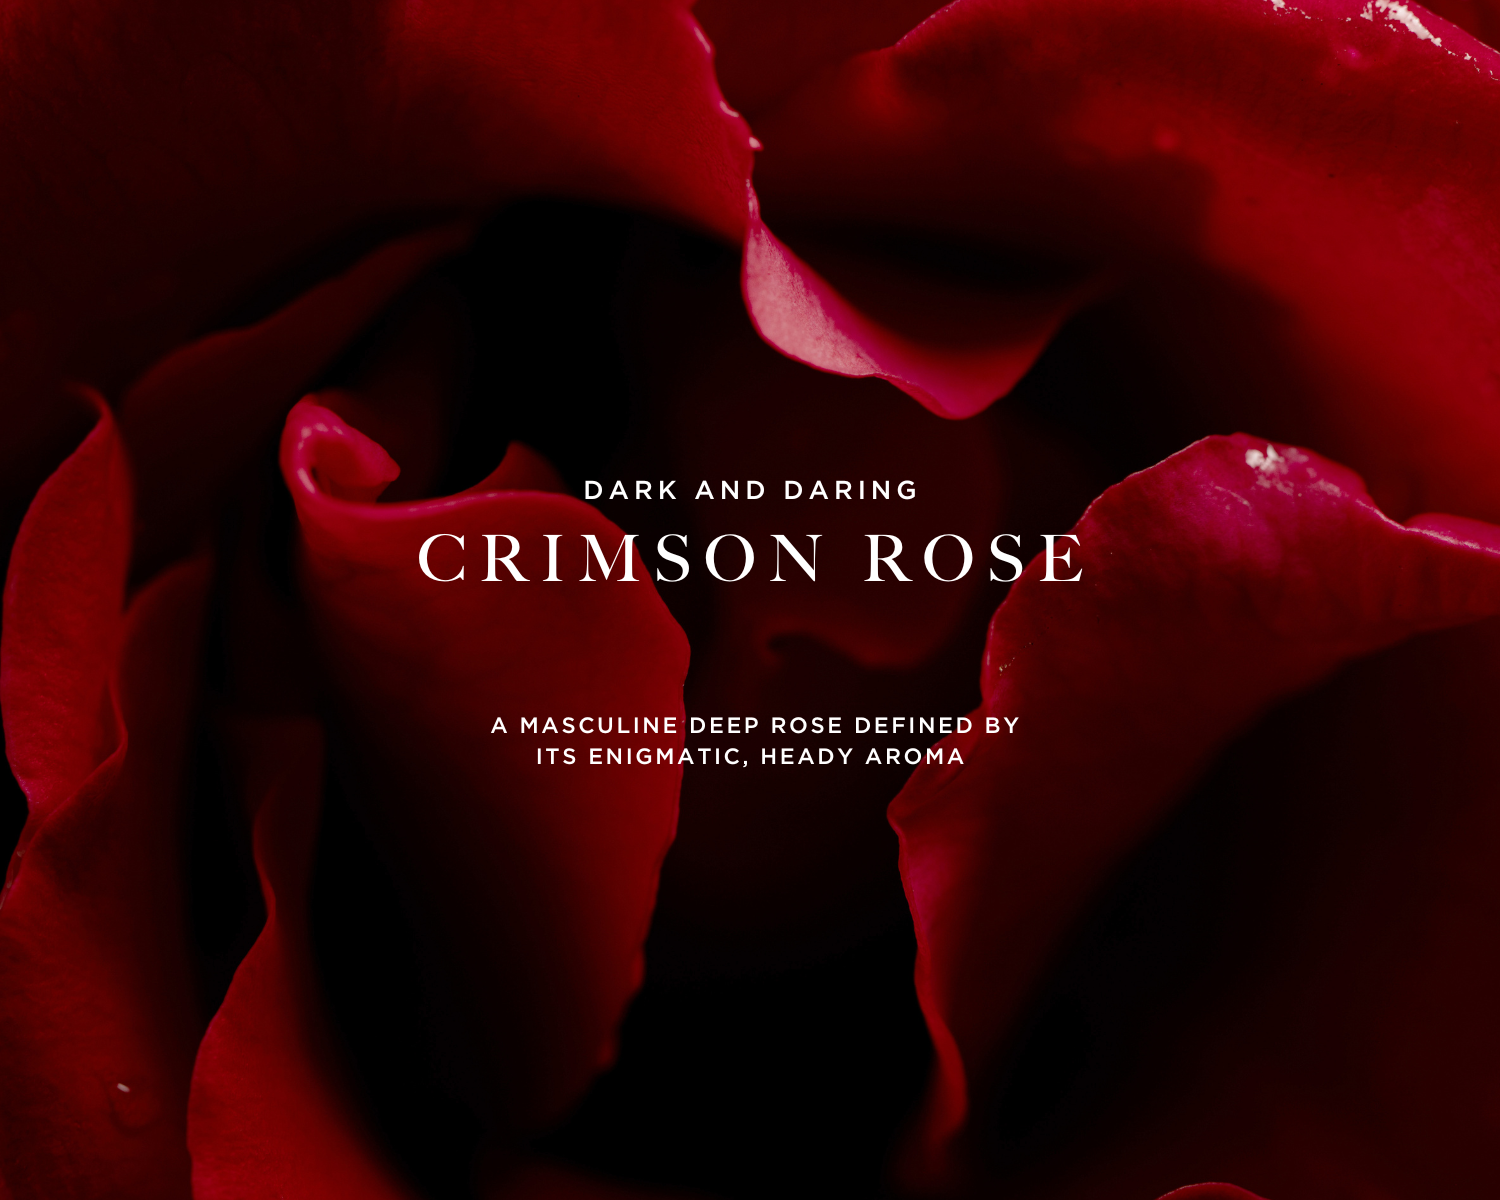 Caswell-Massey RÒS Eau de Parfum for Men: image of red roses representing scent notes with "Dark and Daring Crimson Rose"